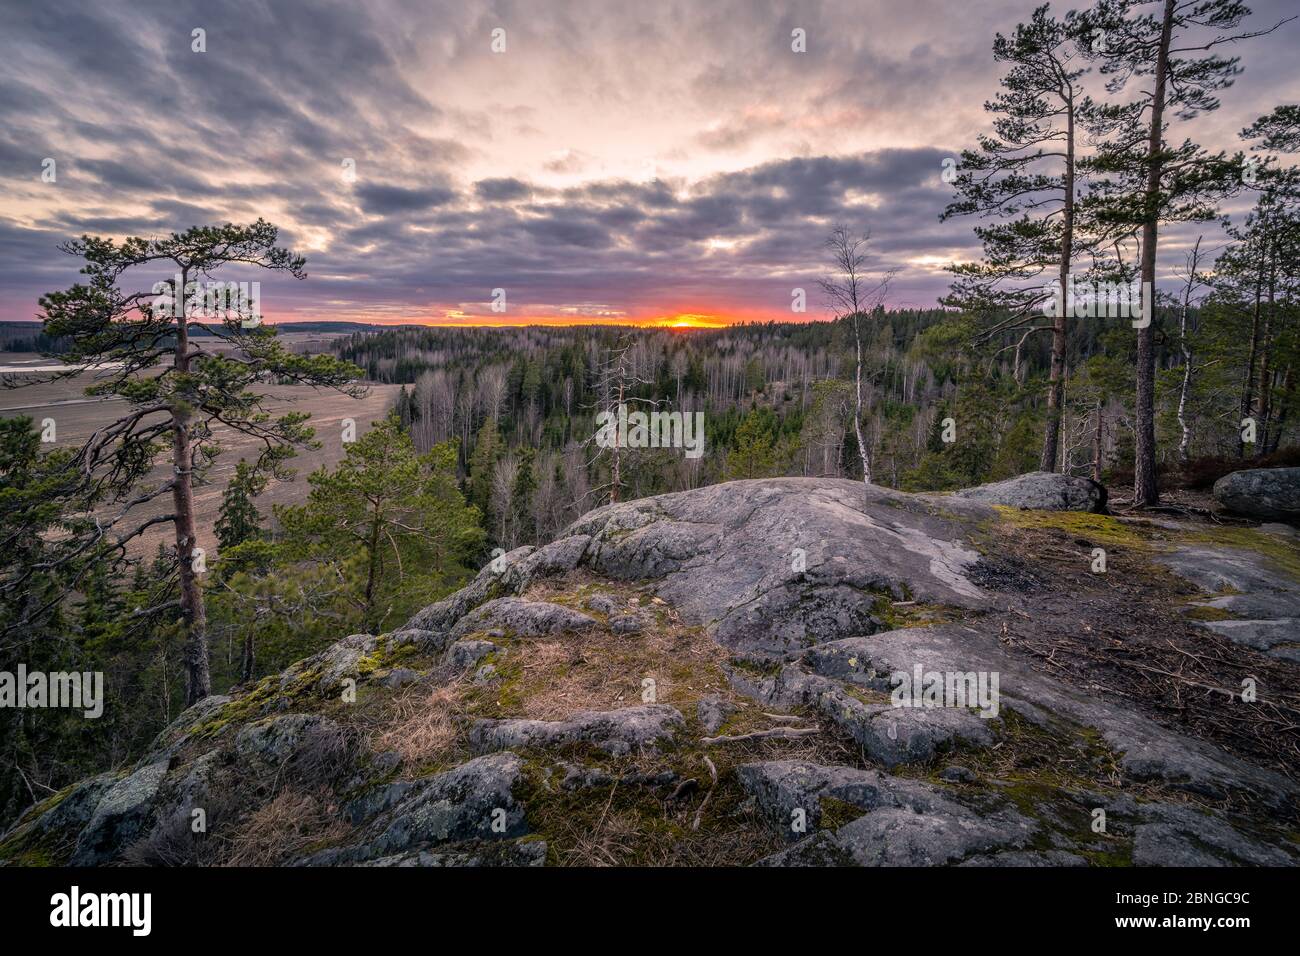 Scenic forest landscape with tranquil mood and idyllic sunset at spring evening in Finland Stock Photo